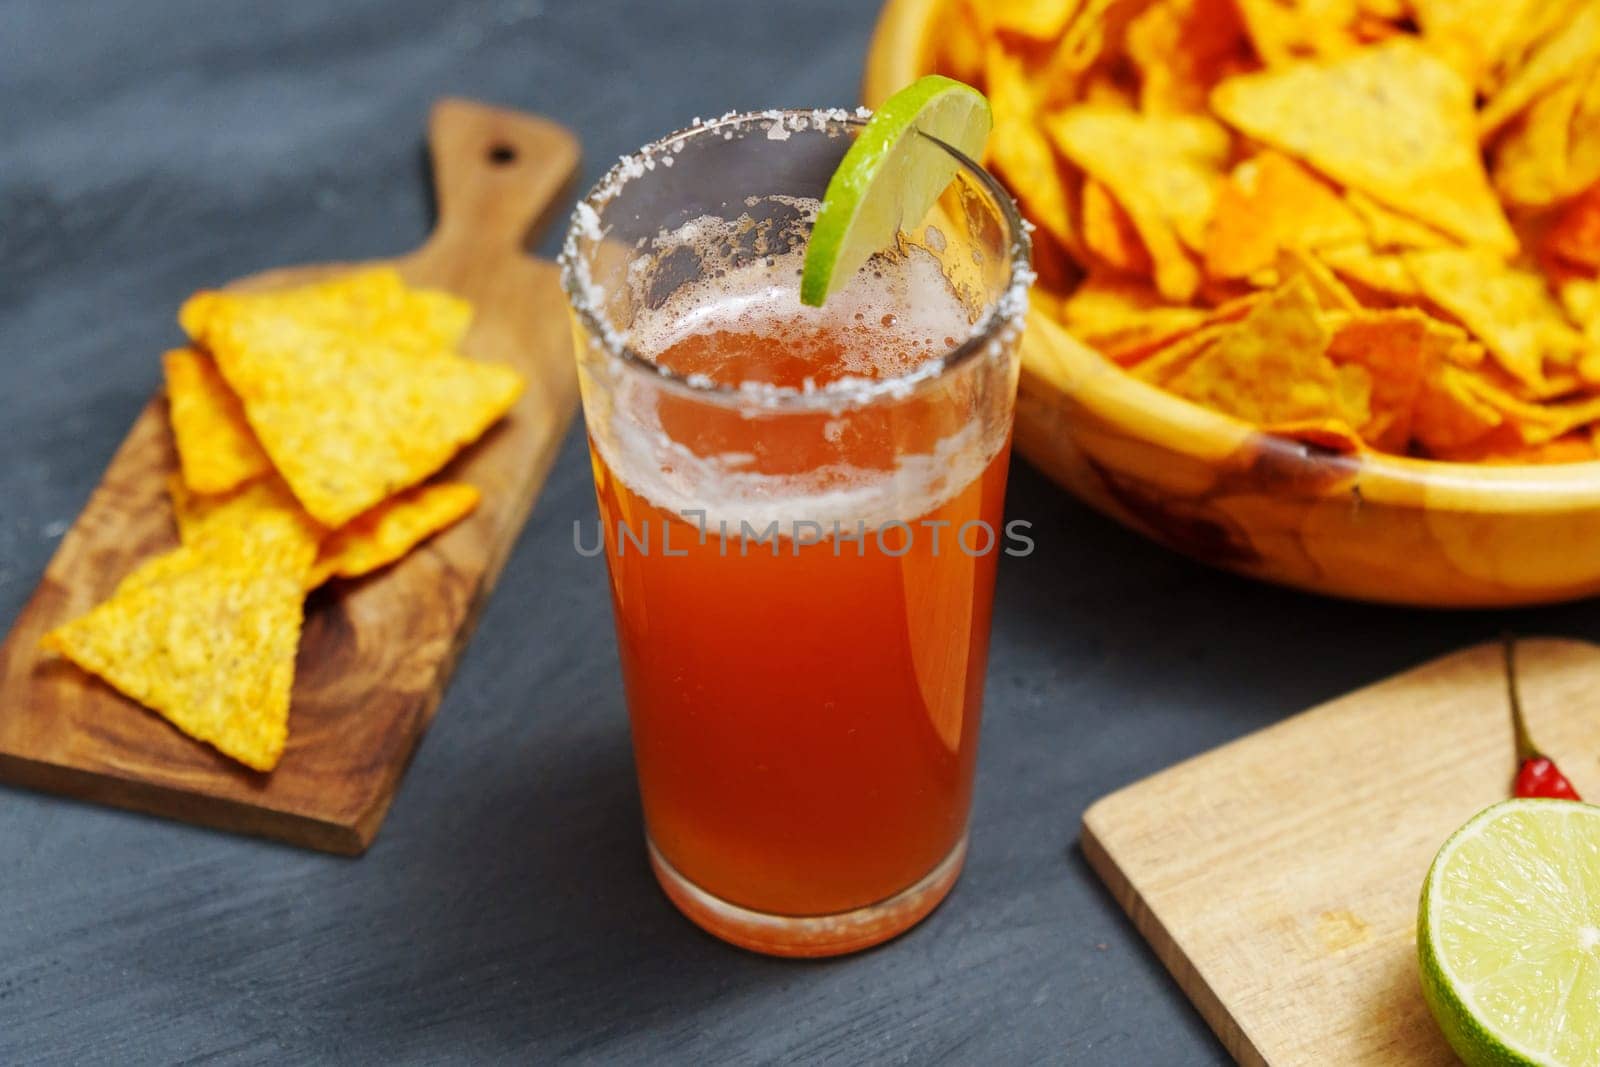 Michelada cocktail with tomato juice, beer and lime in a glass and nachos. Selective focus by darksoul72